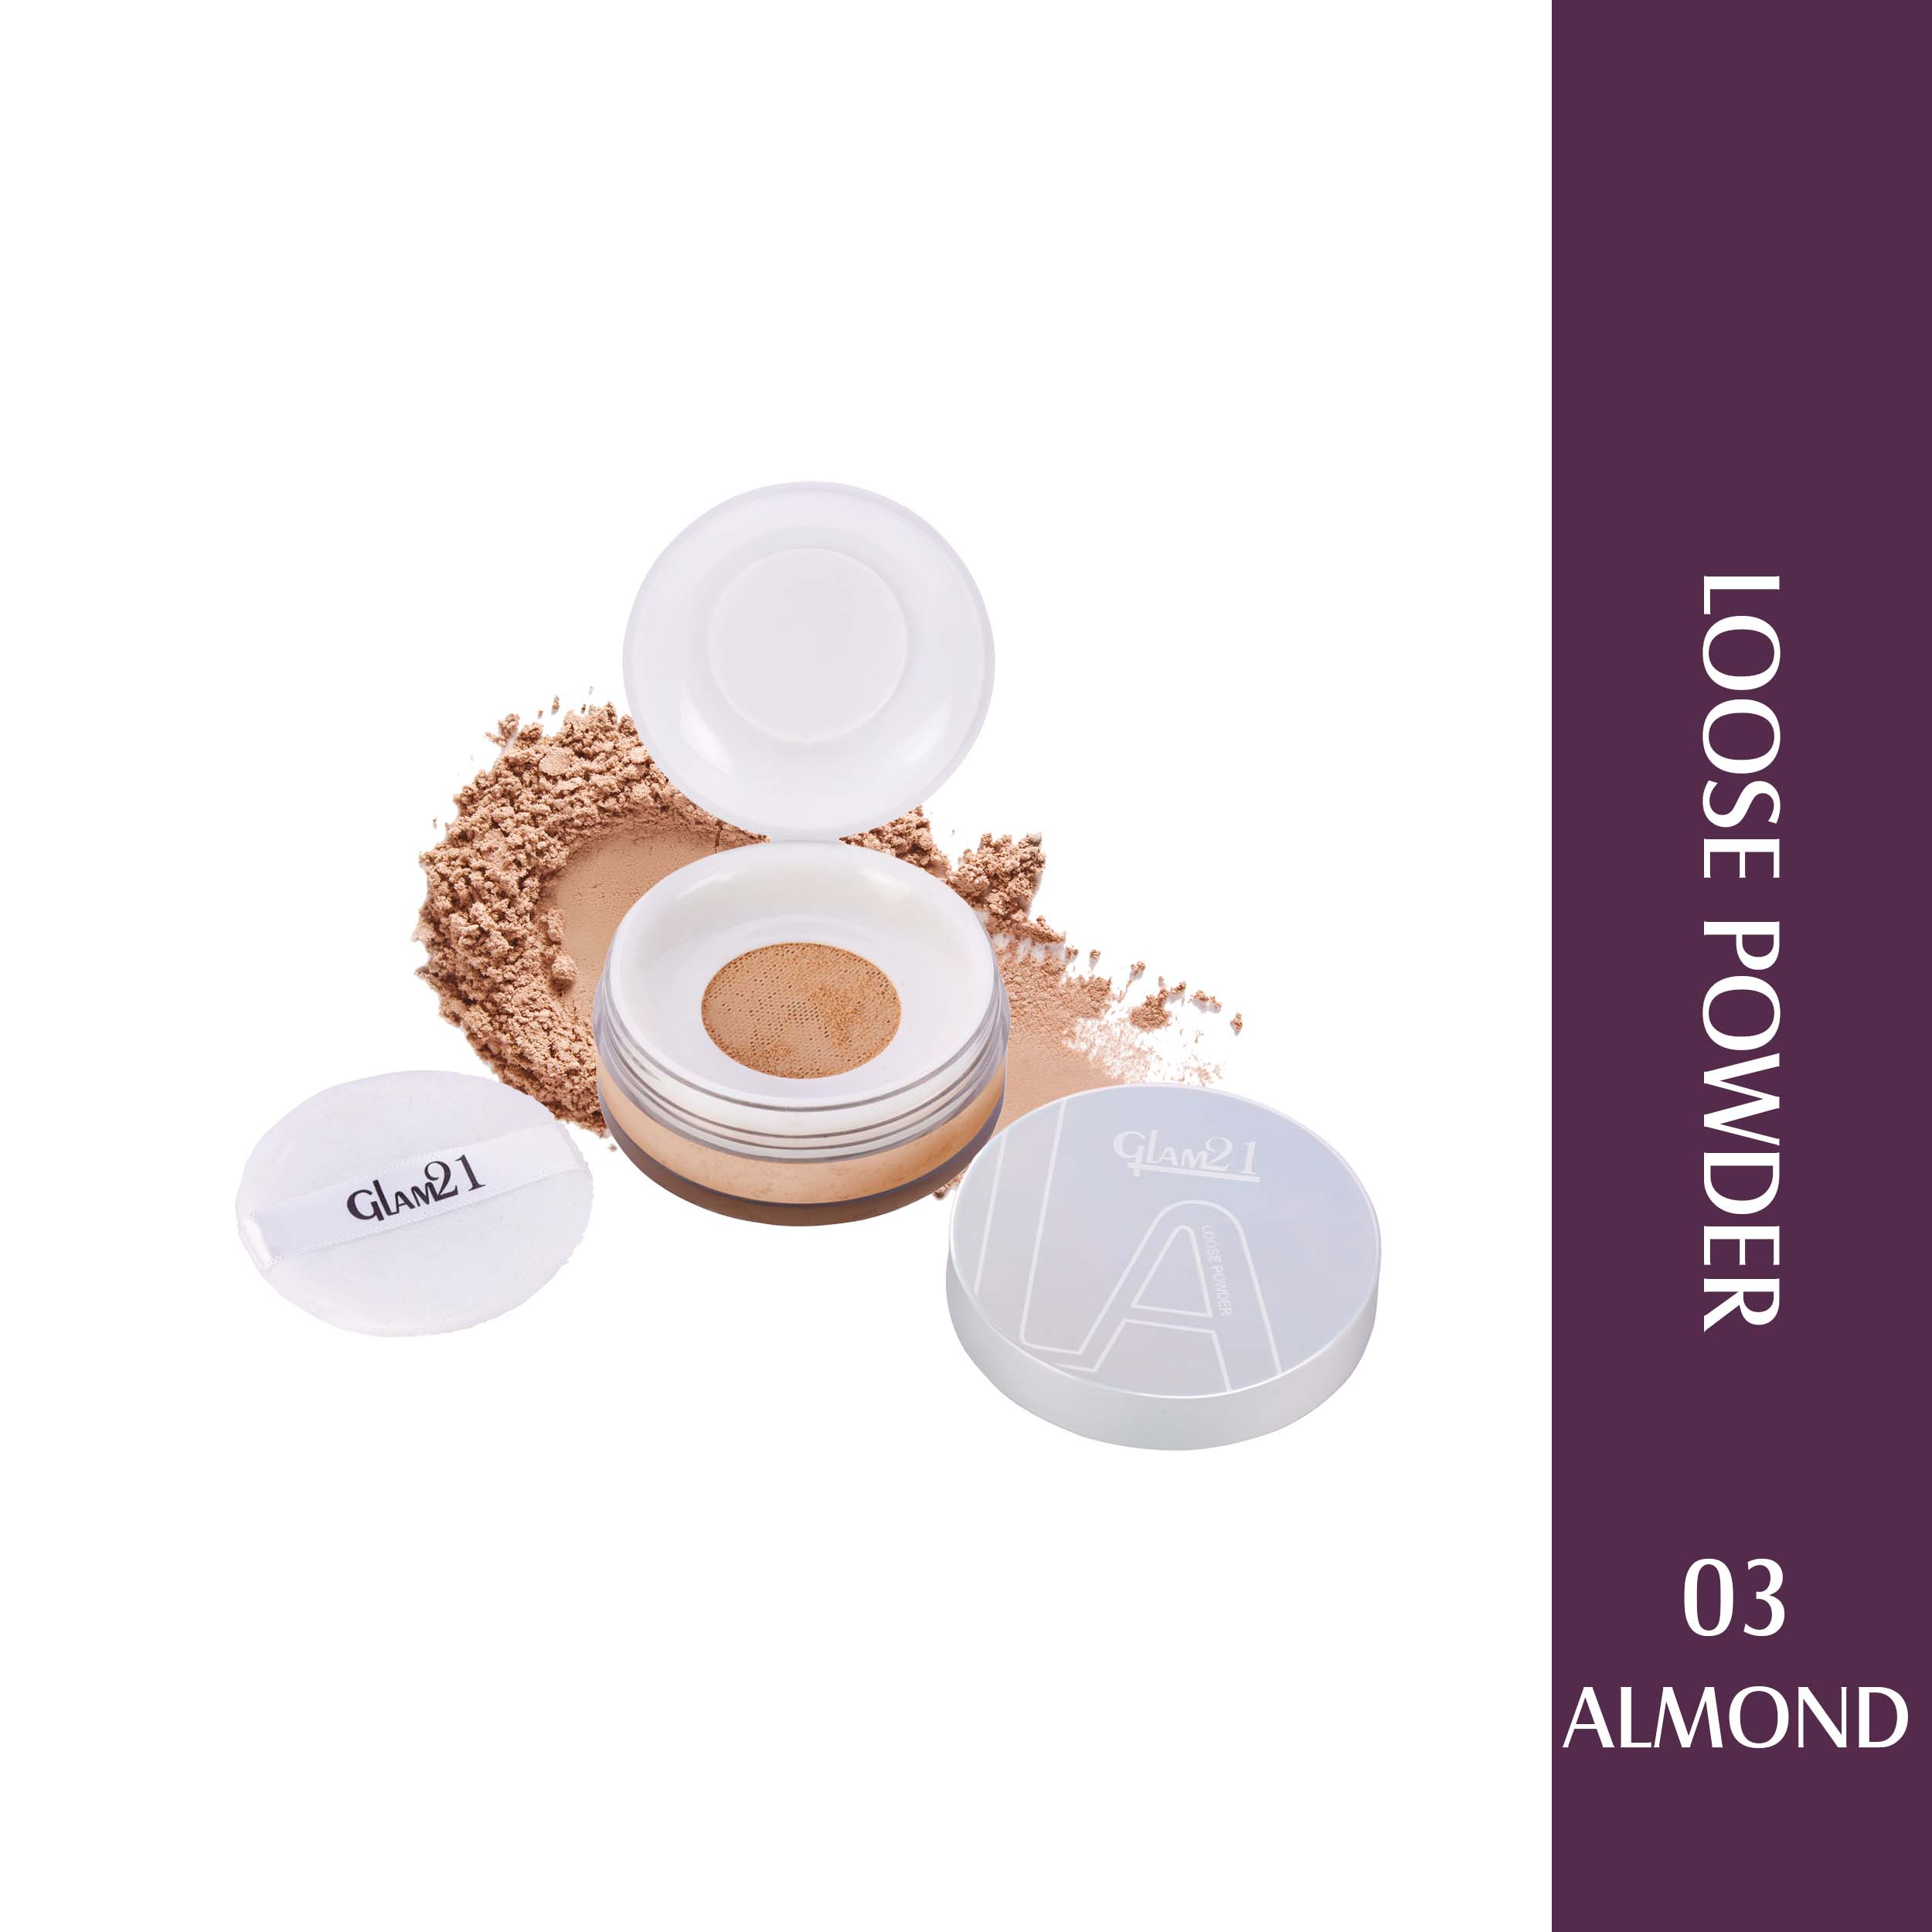 Glam21 Loose Face Powder Compact, 8 g Absorb Excess Oil & Sweat | Give the Best Sheer Finish Compact, 8 g (Almond)